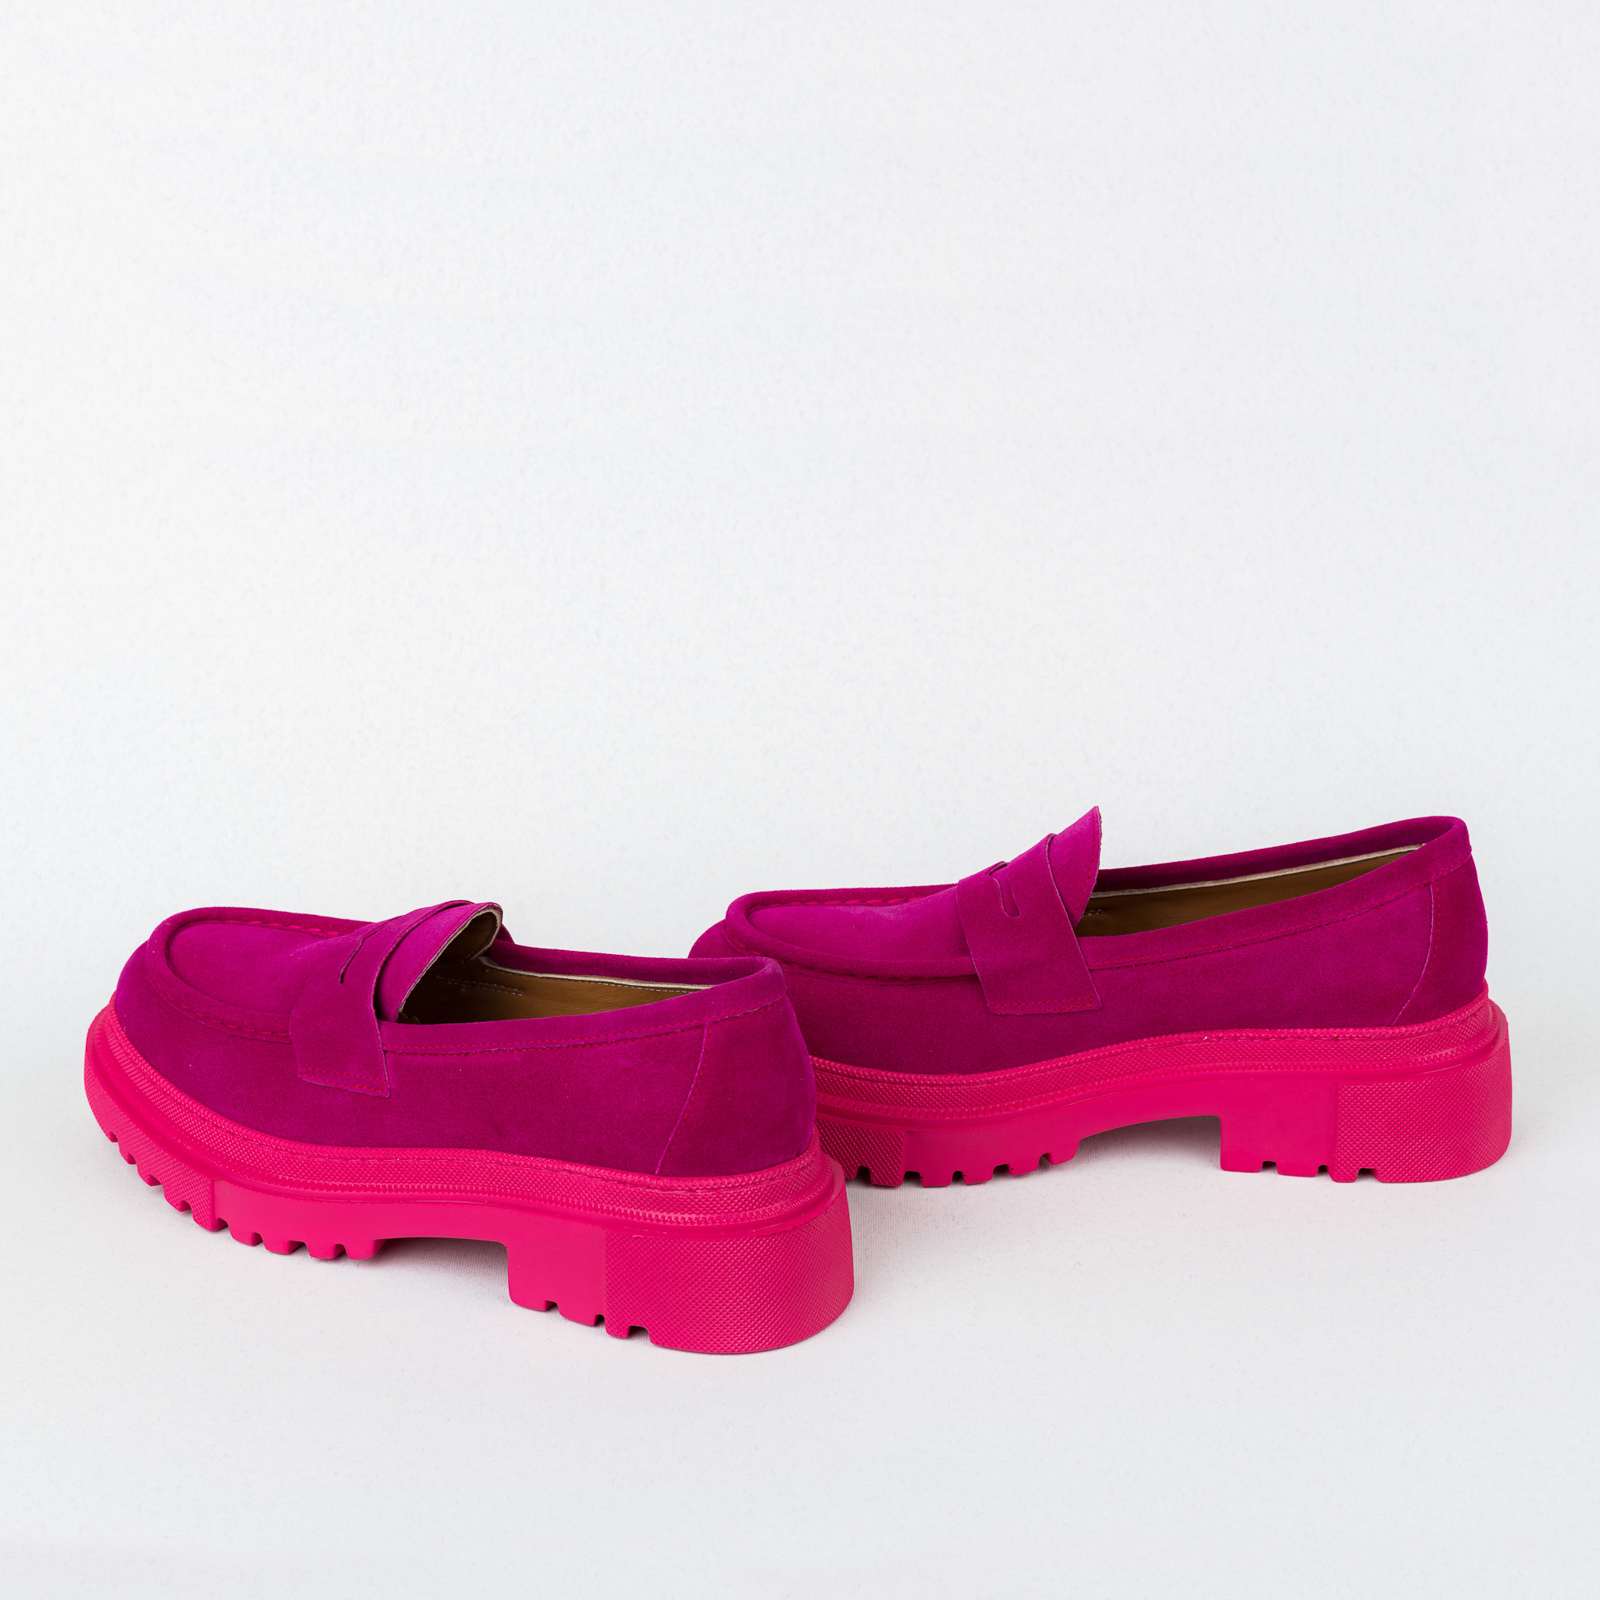 Leather shoes & flats B063 - PINK